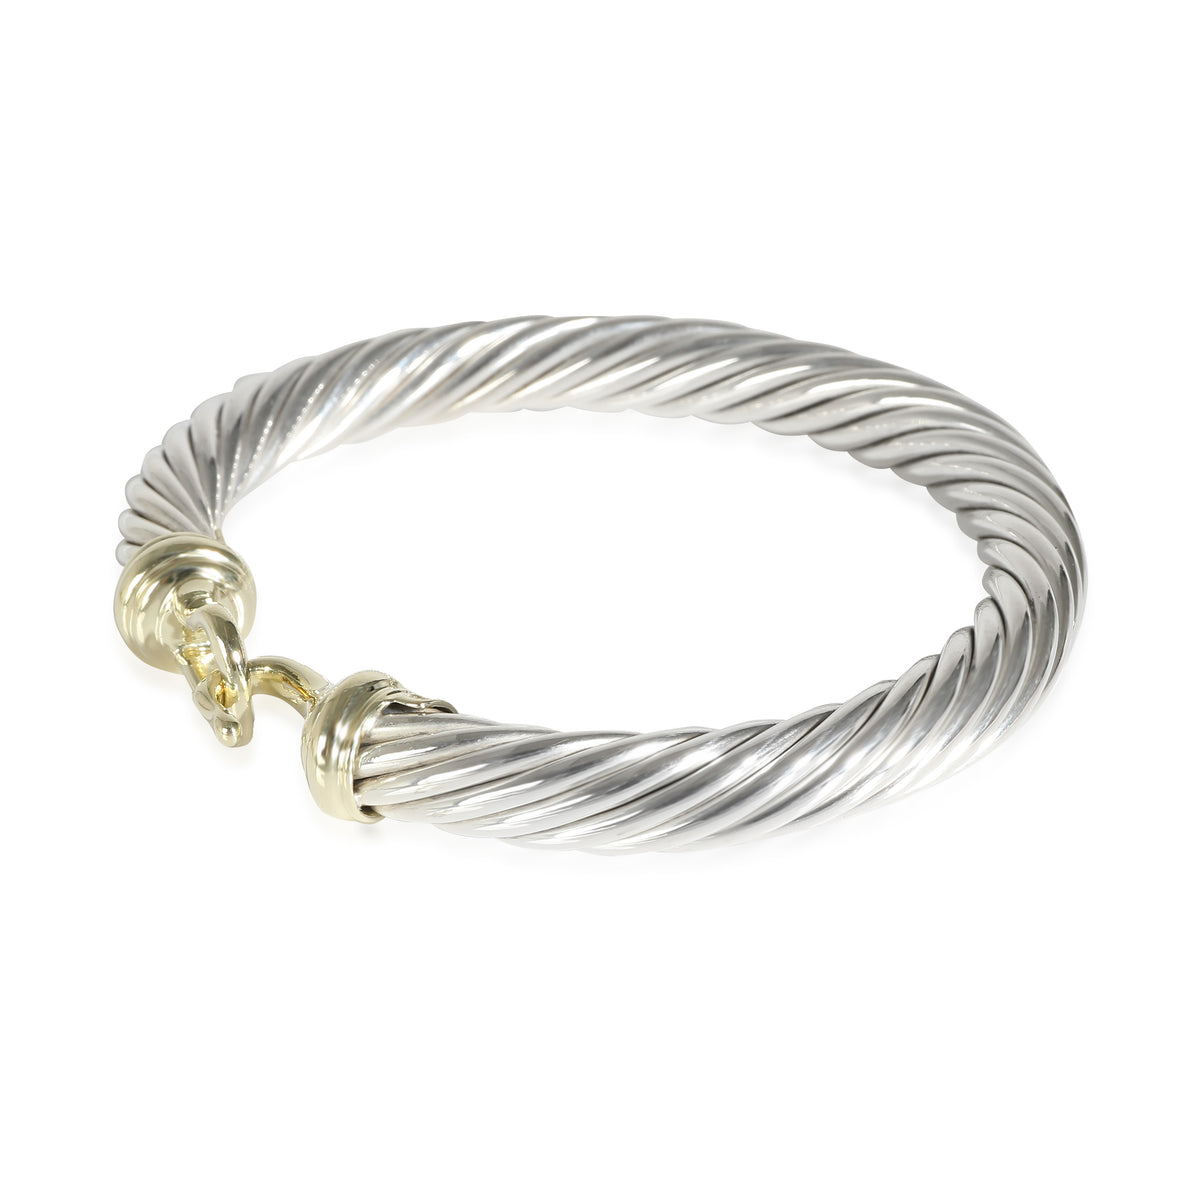 Cable Buckle Bracelet in 14k Yellow Gold/Sterling Silver